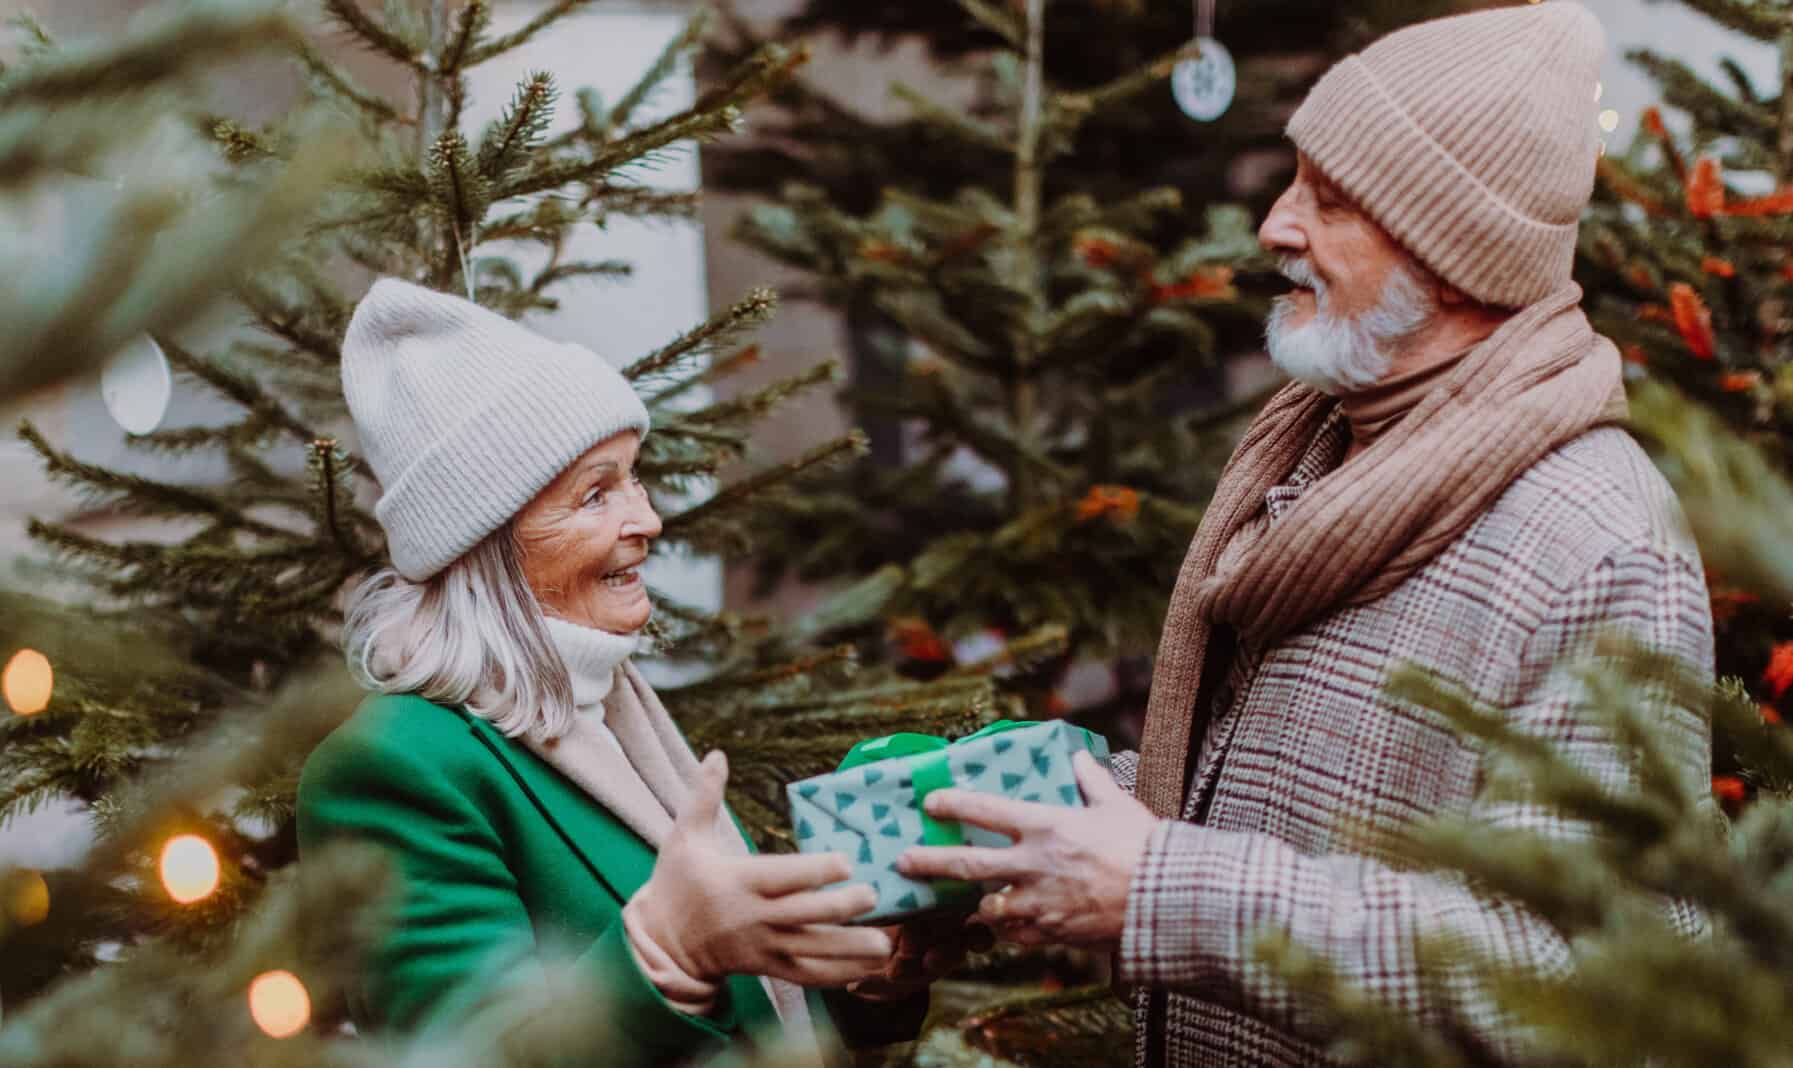 senior couple exchanging gifts (Image: Shutterstock)